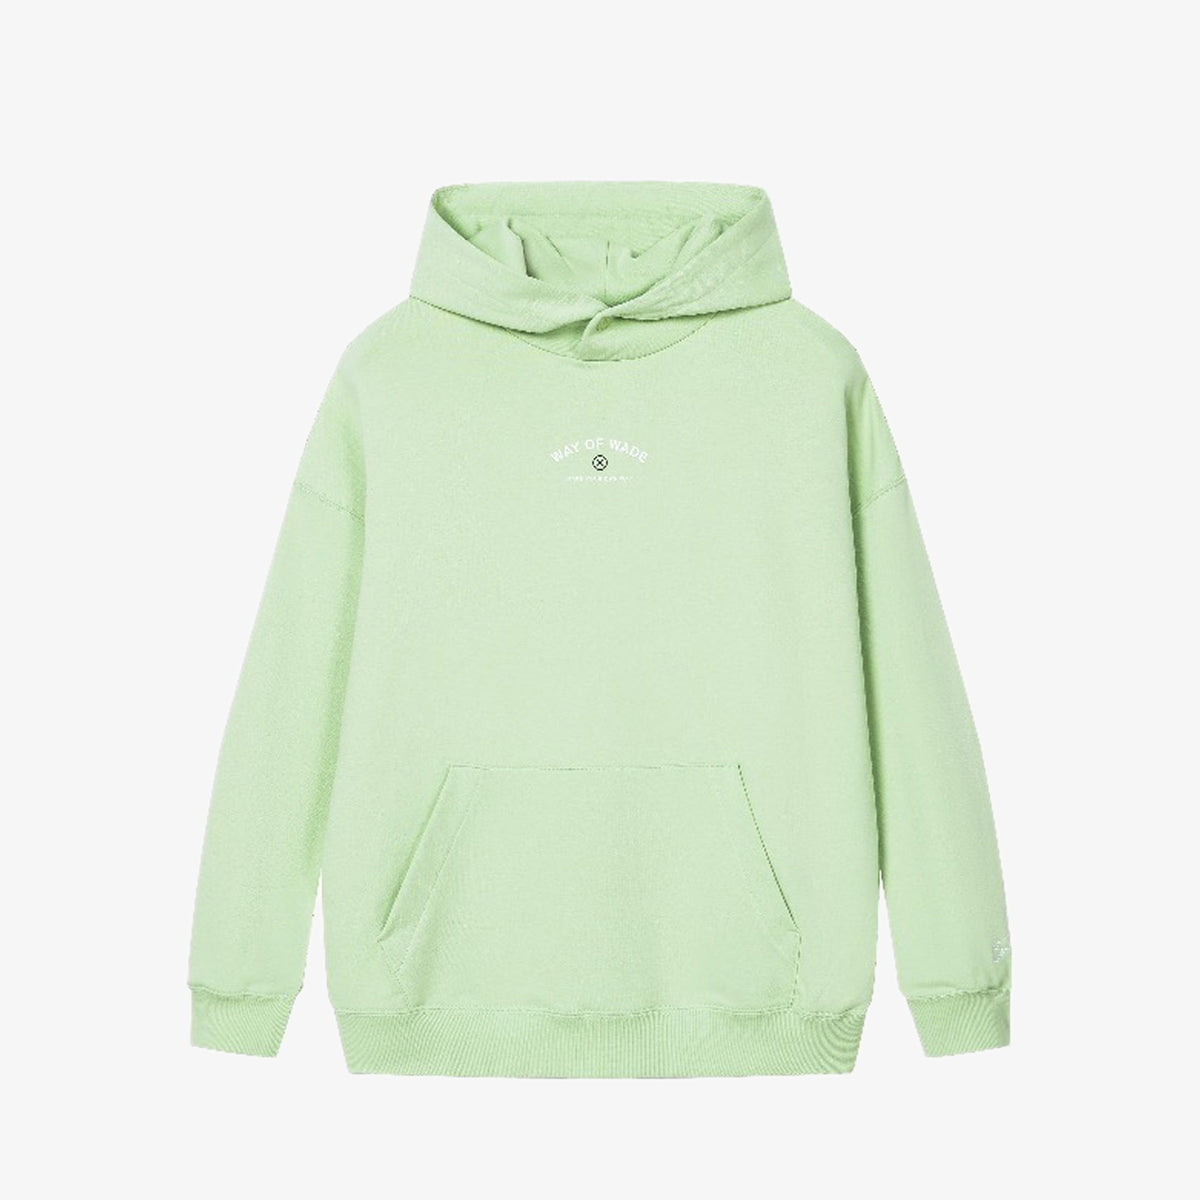 Wade &#39;Make Your Own Way&#39; Hoodie - Mint